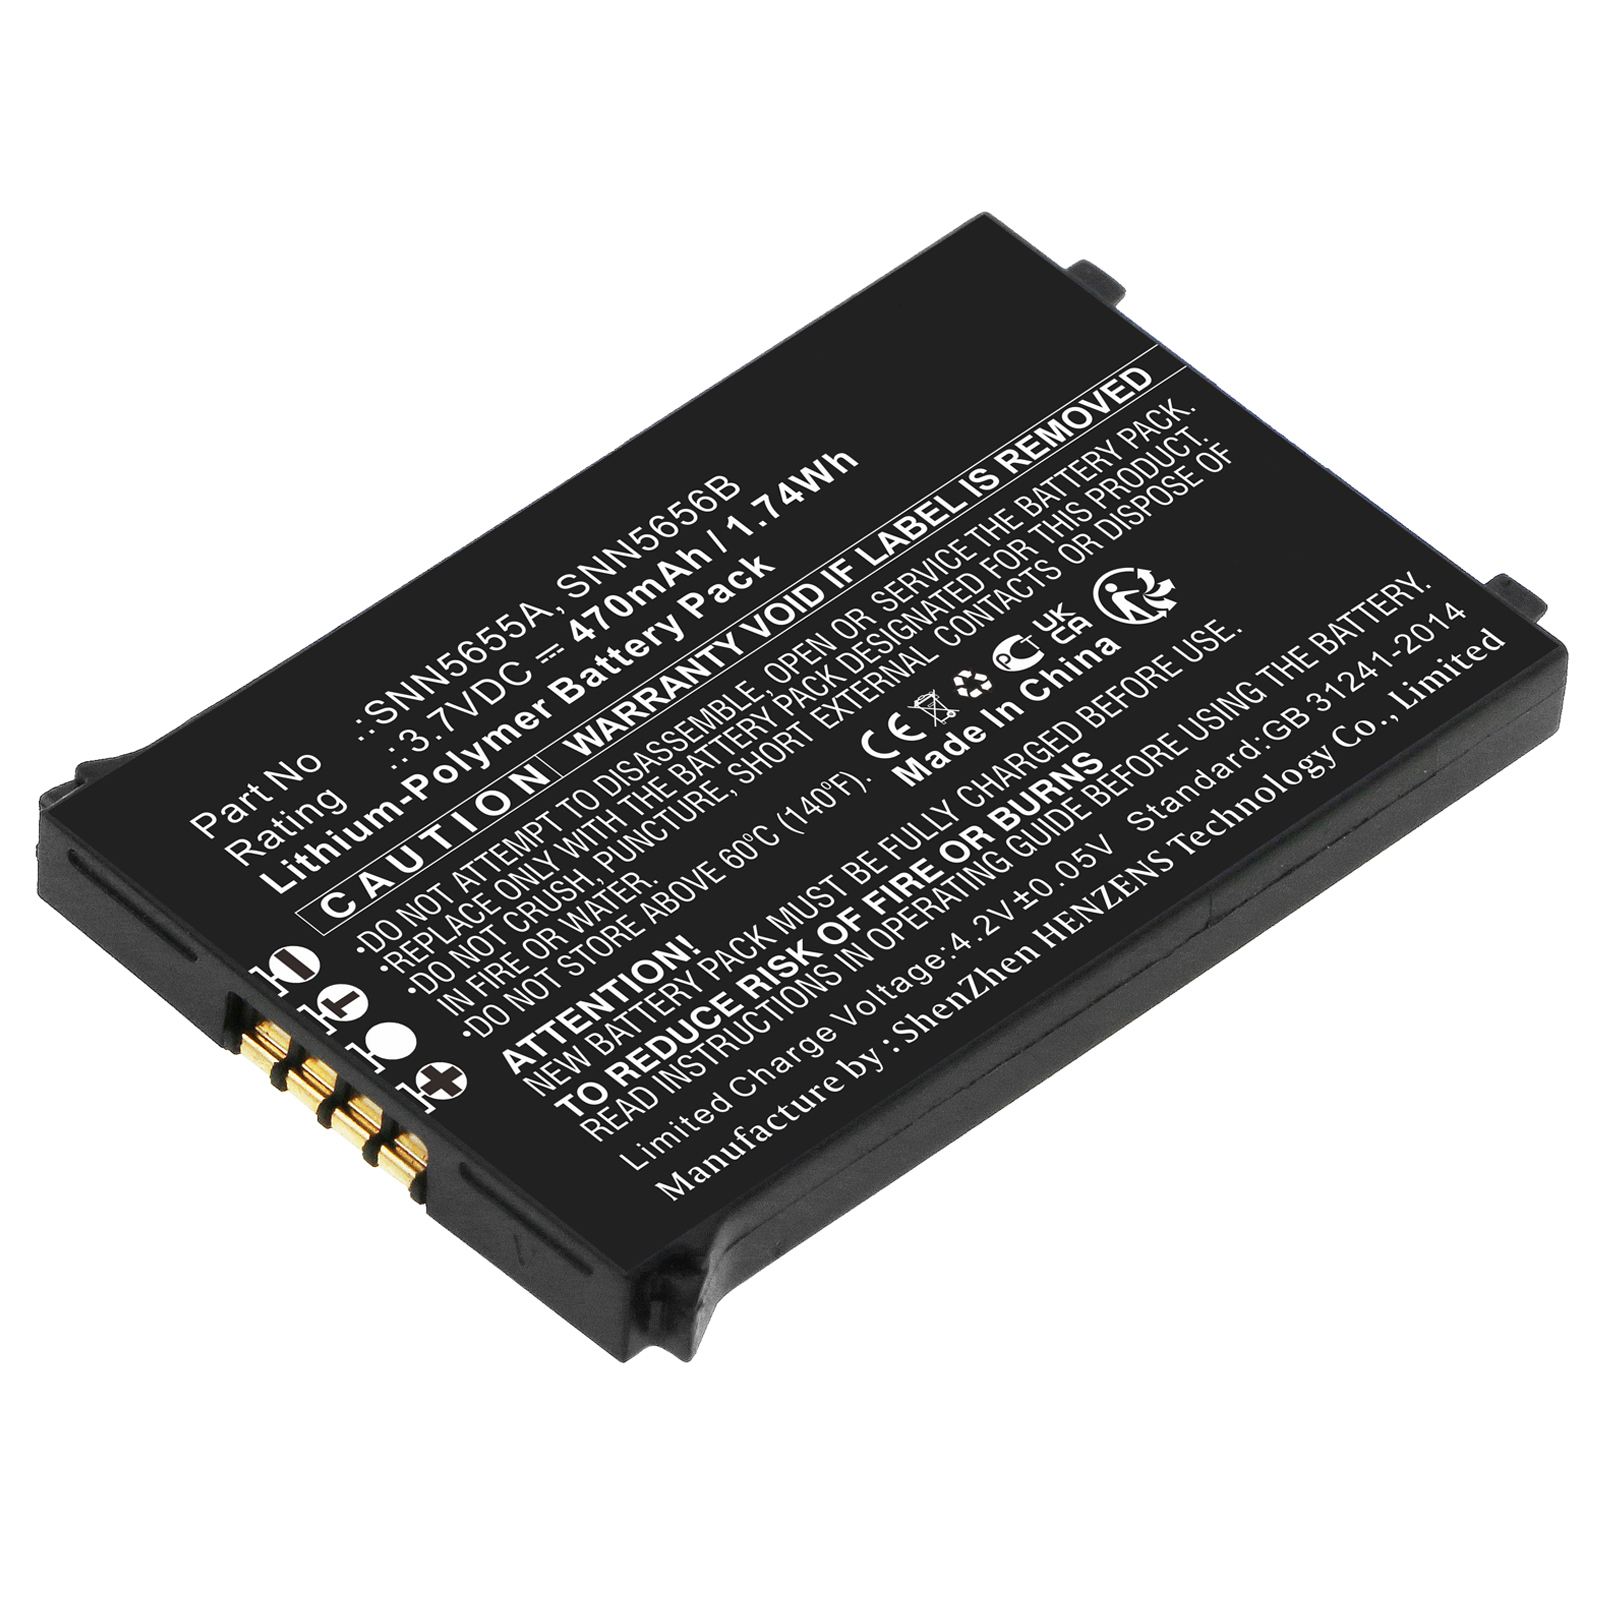 Synergy Digital Cell Phone Battery, Compatible with Motorola SNN5655A Cell Phone Battery (Li-ion, 3.7V, 470mAh)